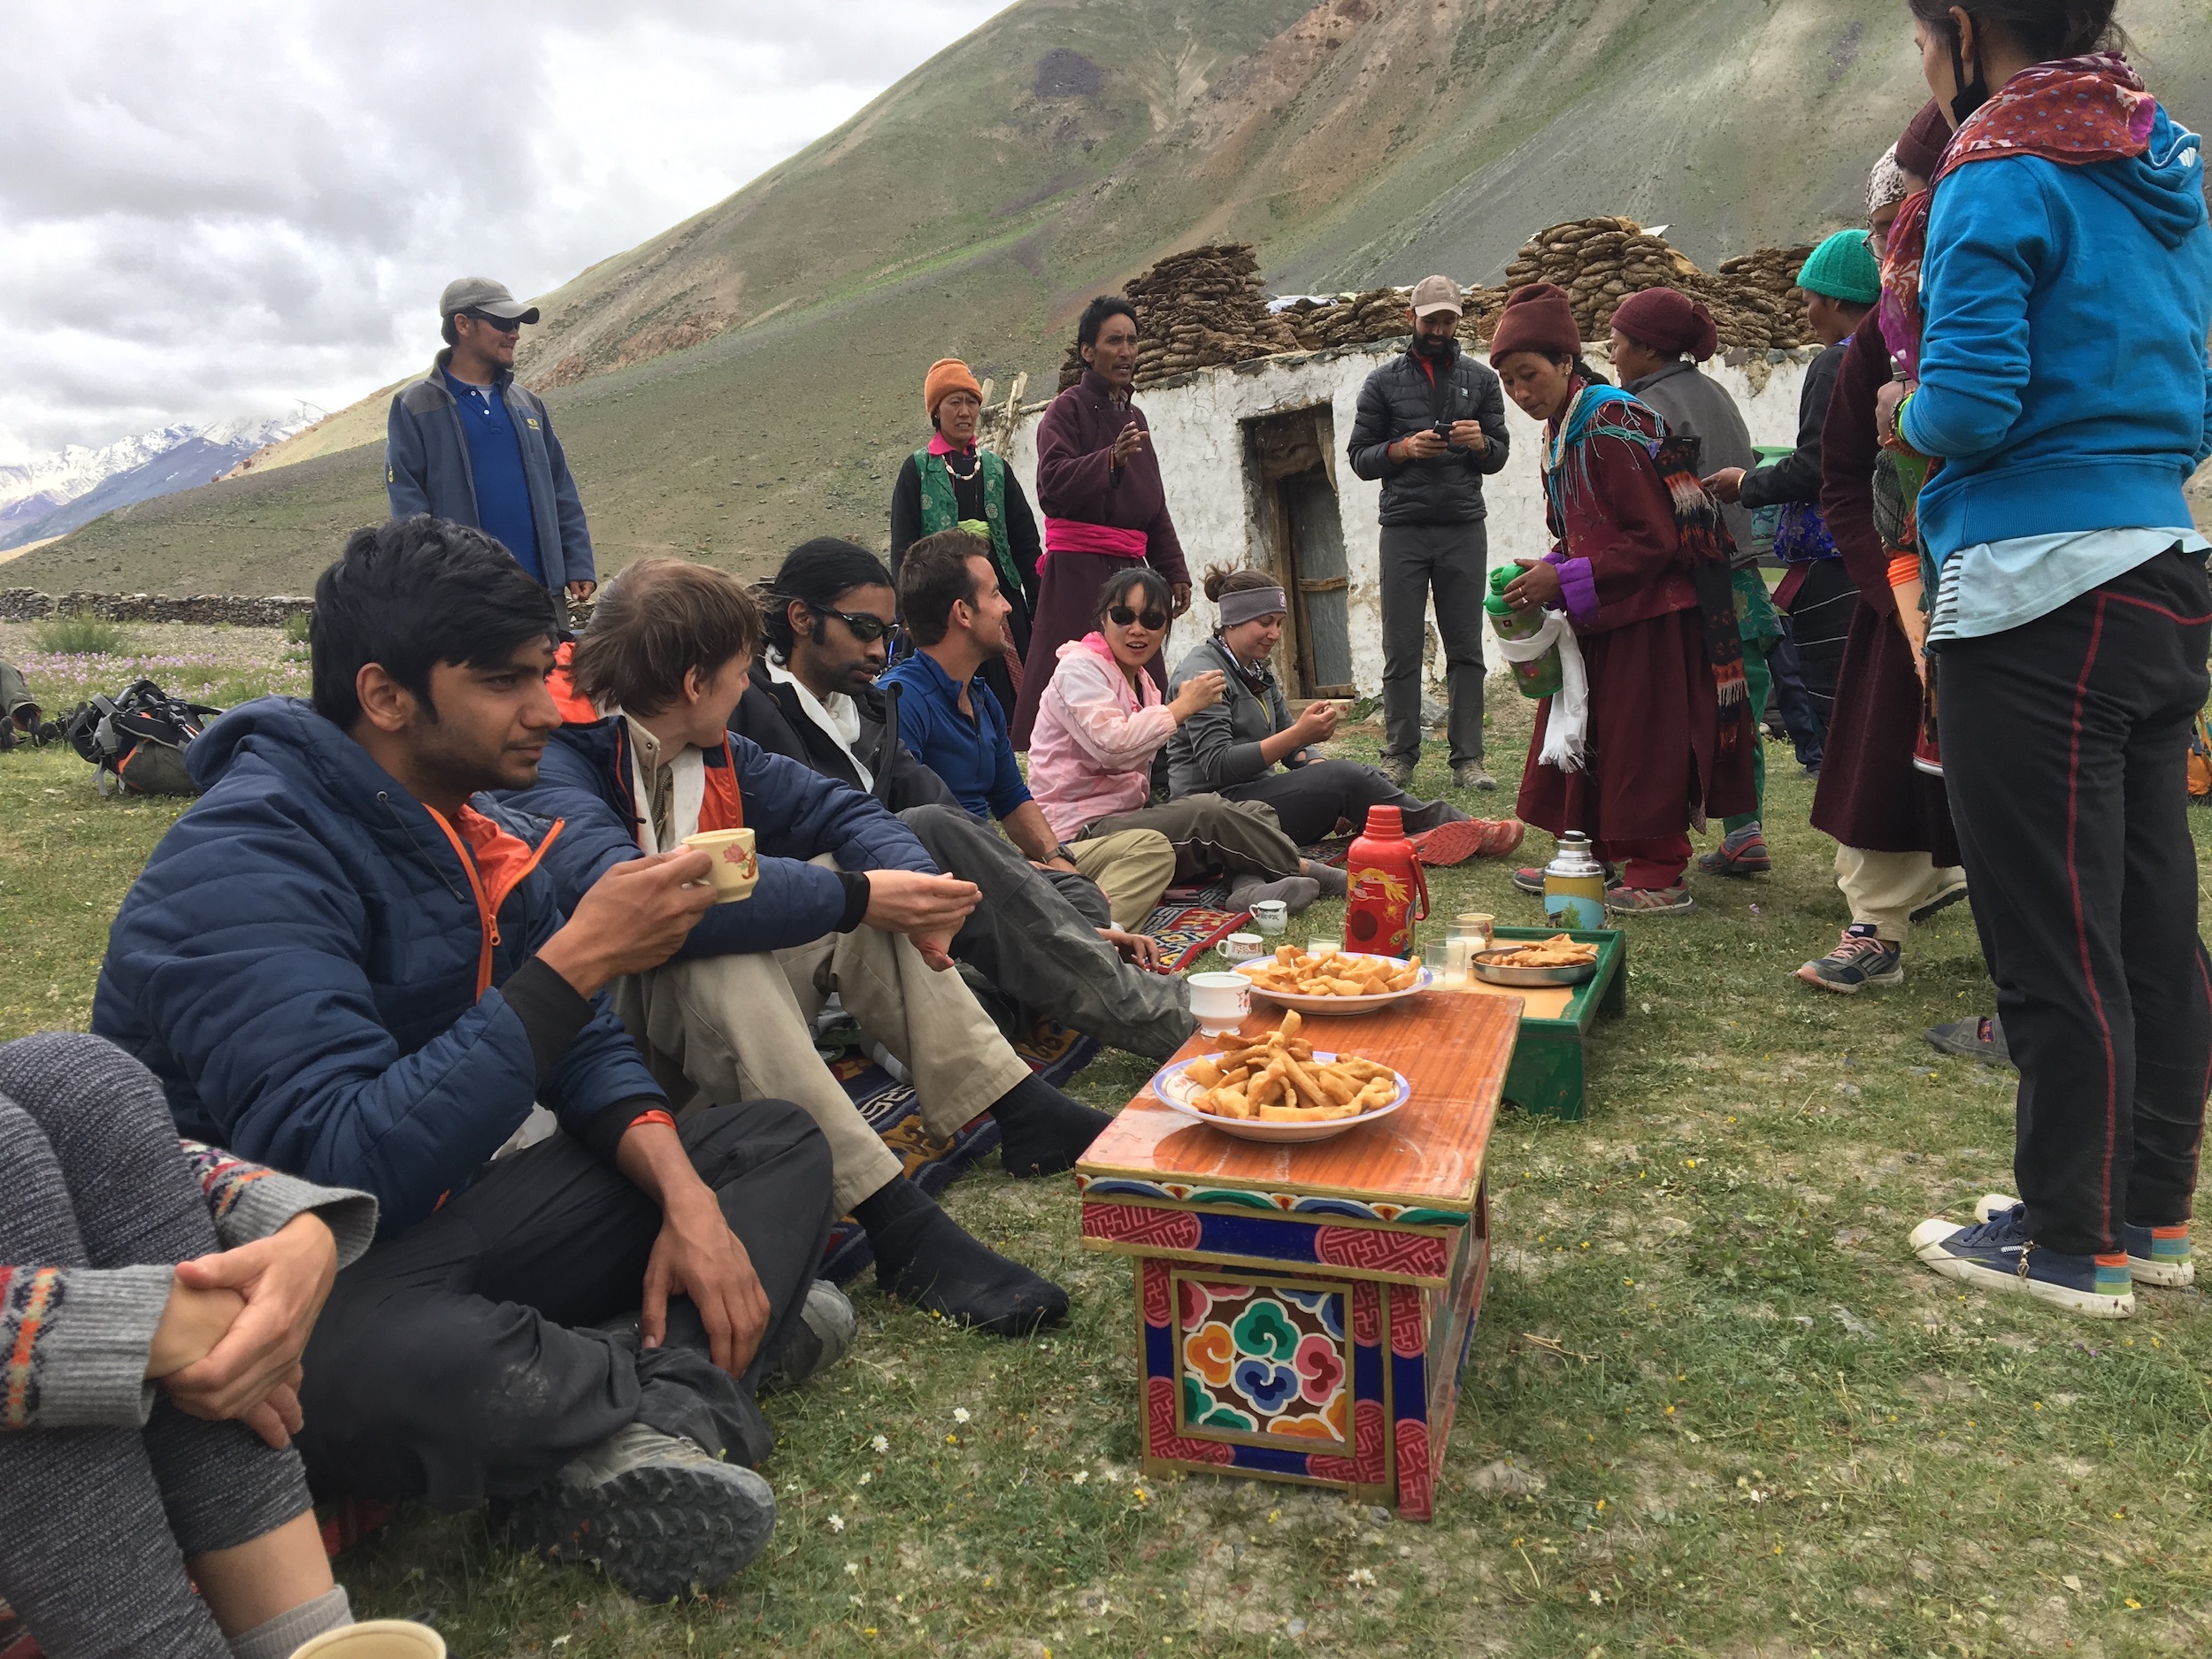 Global Himalayan Expedition team eat snacks with community (photo credit: GHE)